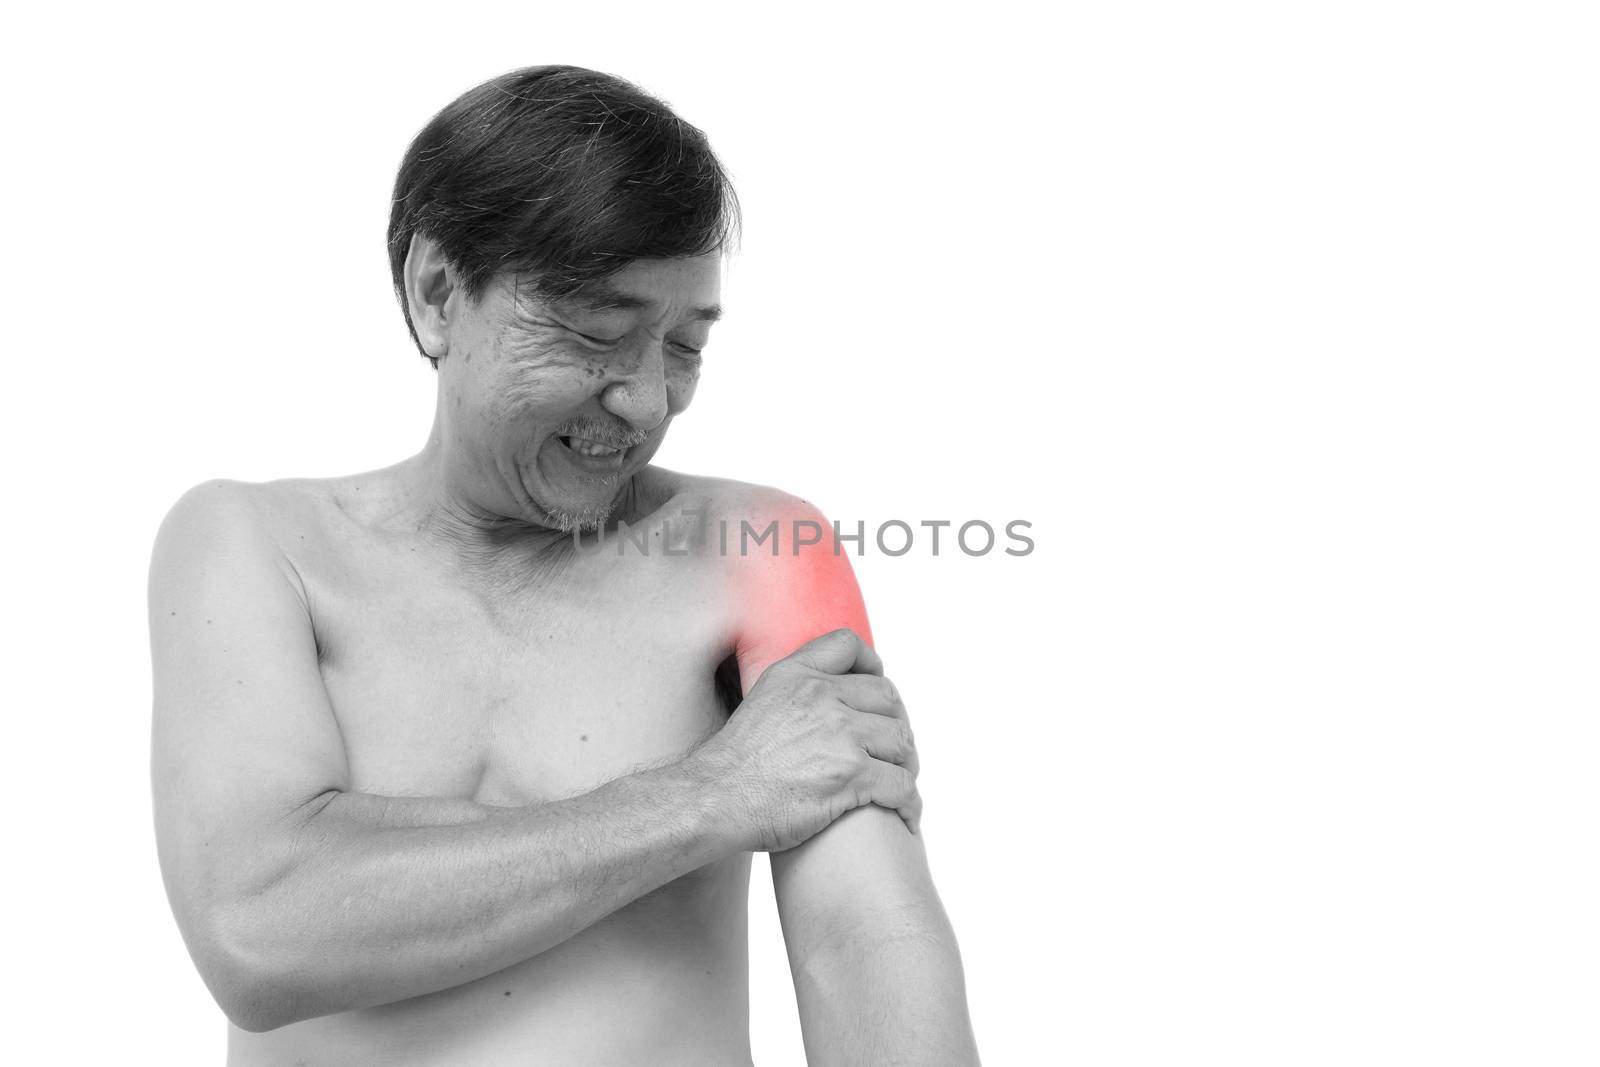 "Muscle strain" Old aged thai man grasp his arm. And blank area at right side